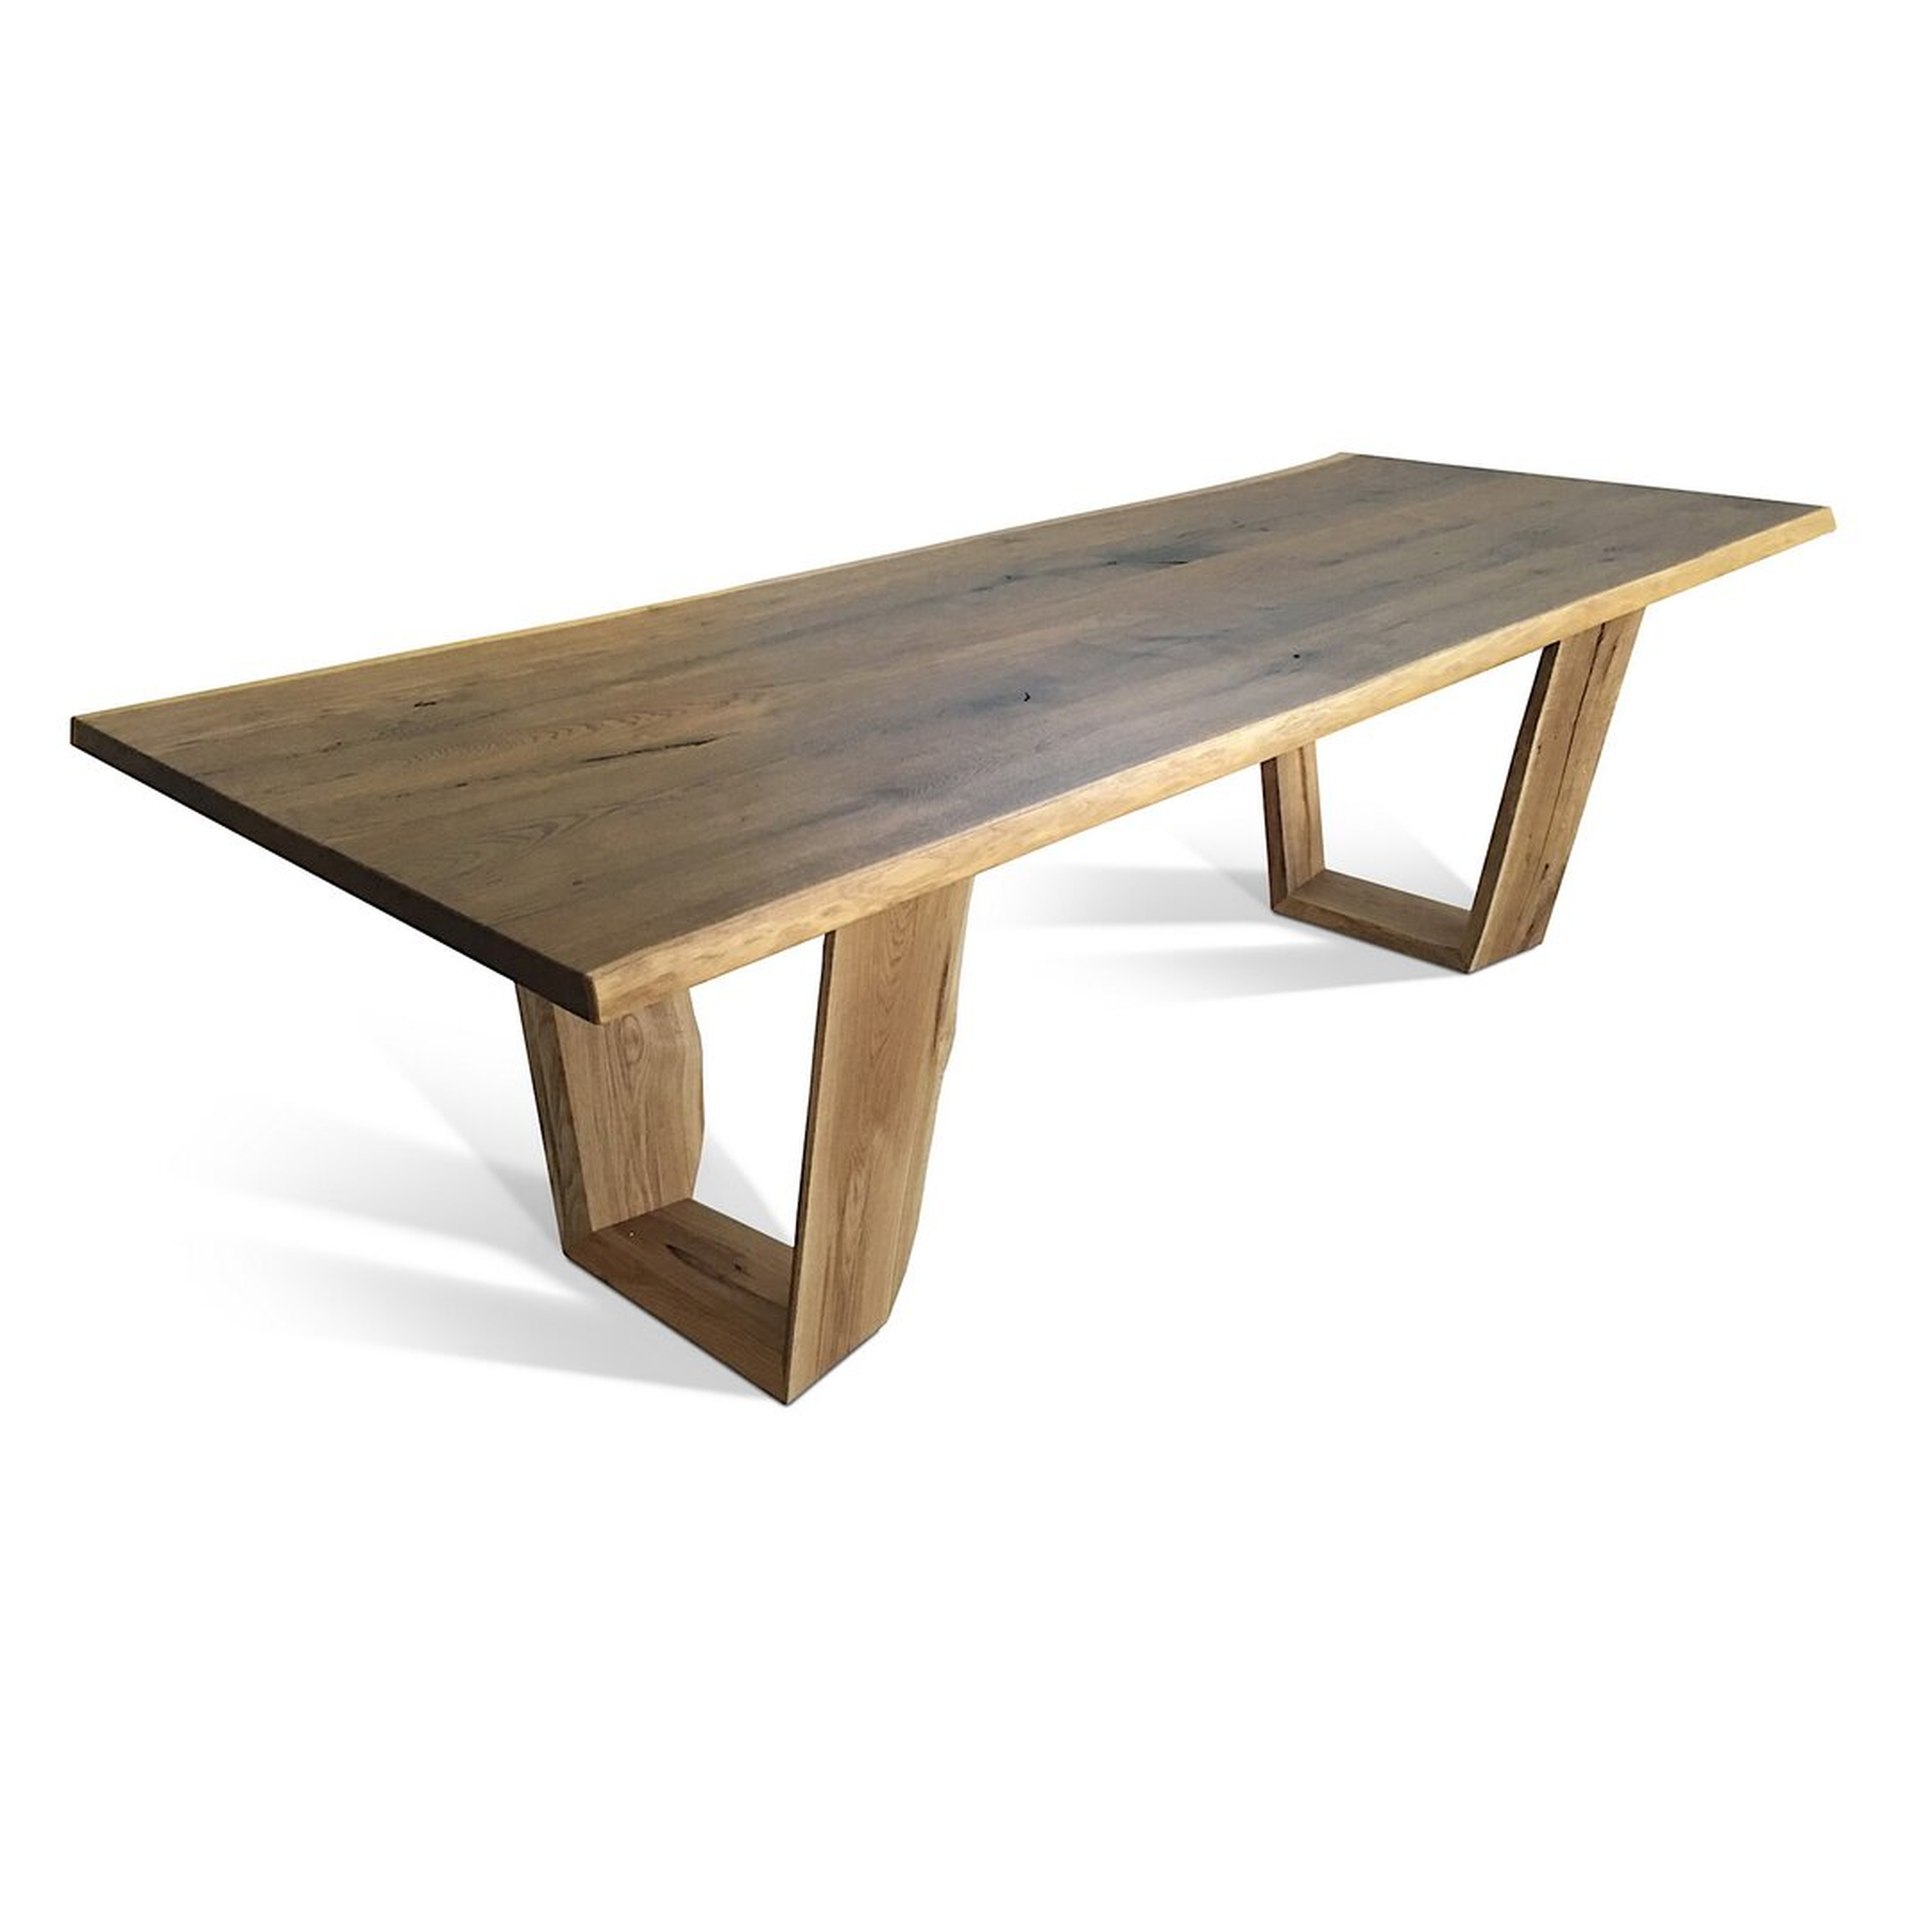 "VVRHomes Bergen Solid Wood Dining Table" - Perigold